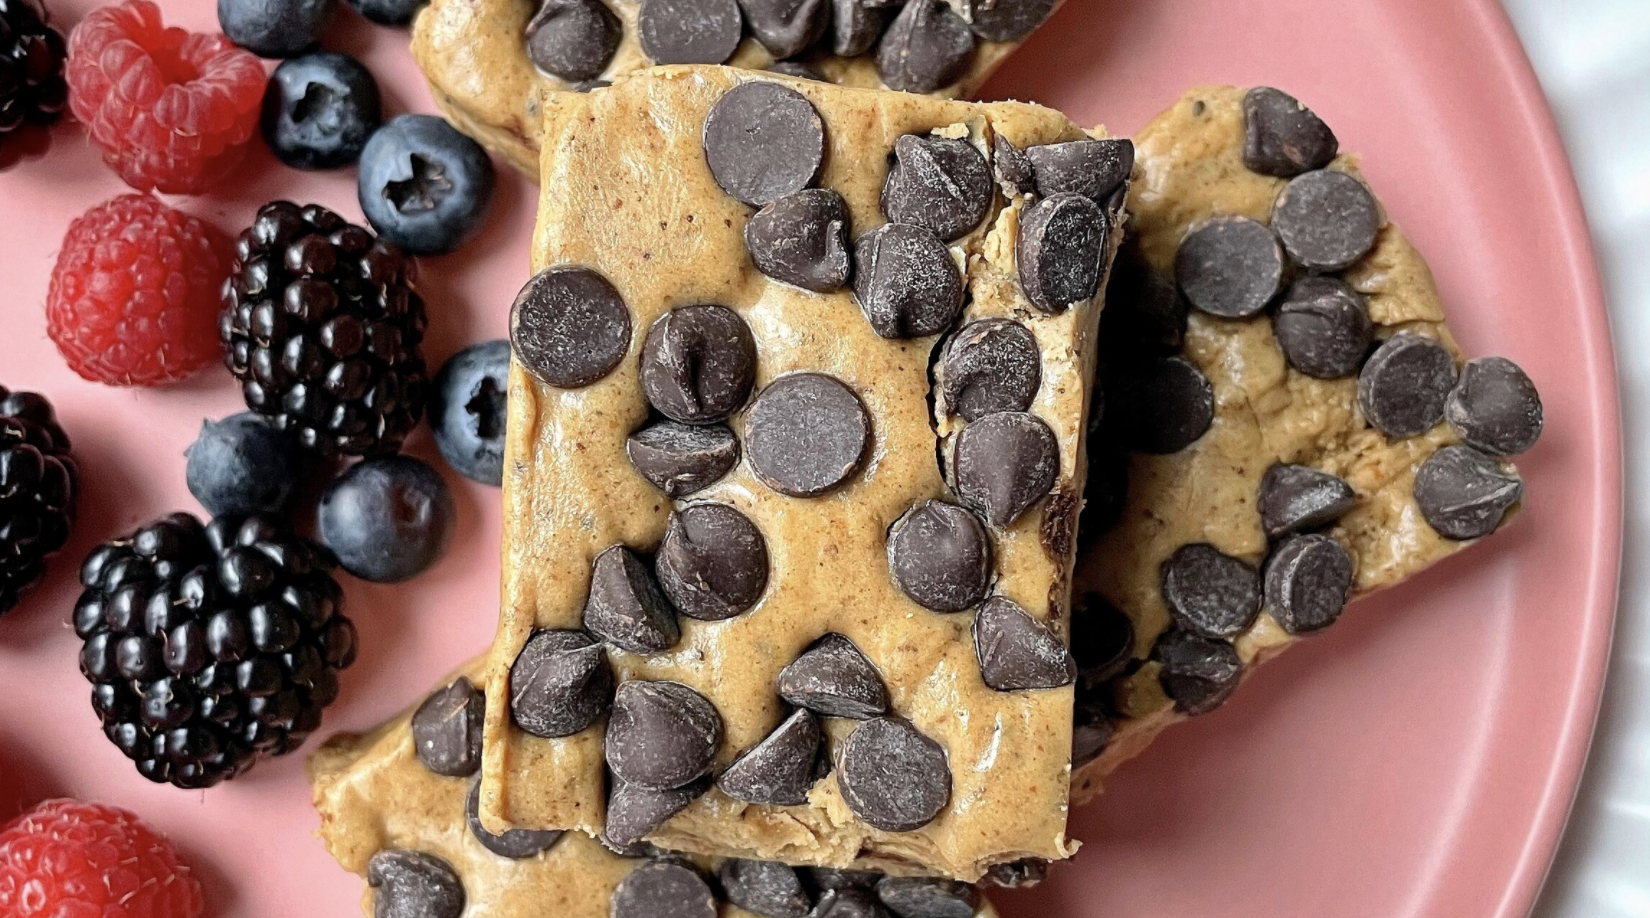 Peanut Butter Protein Bars